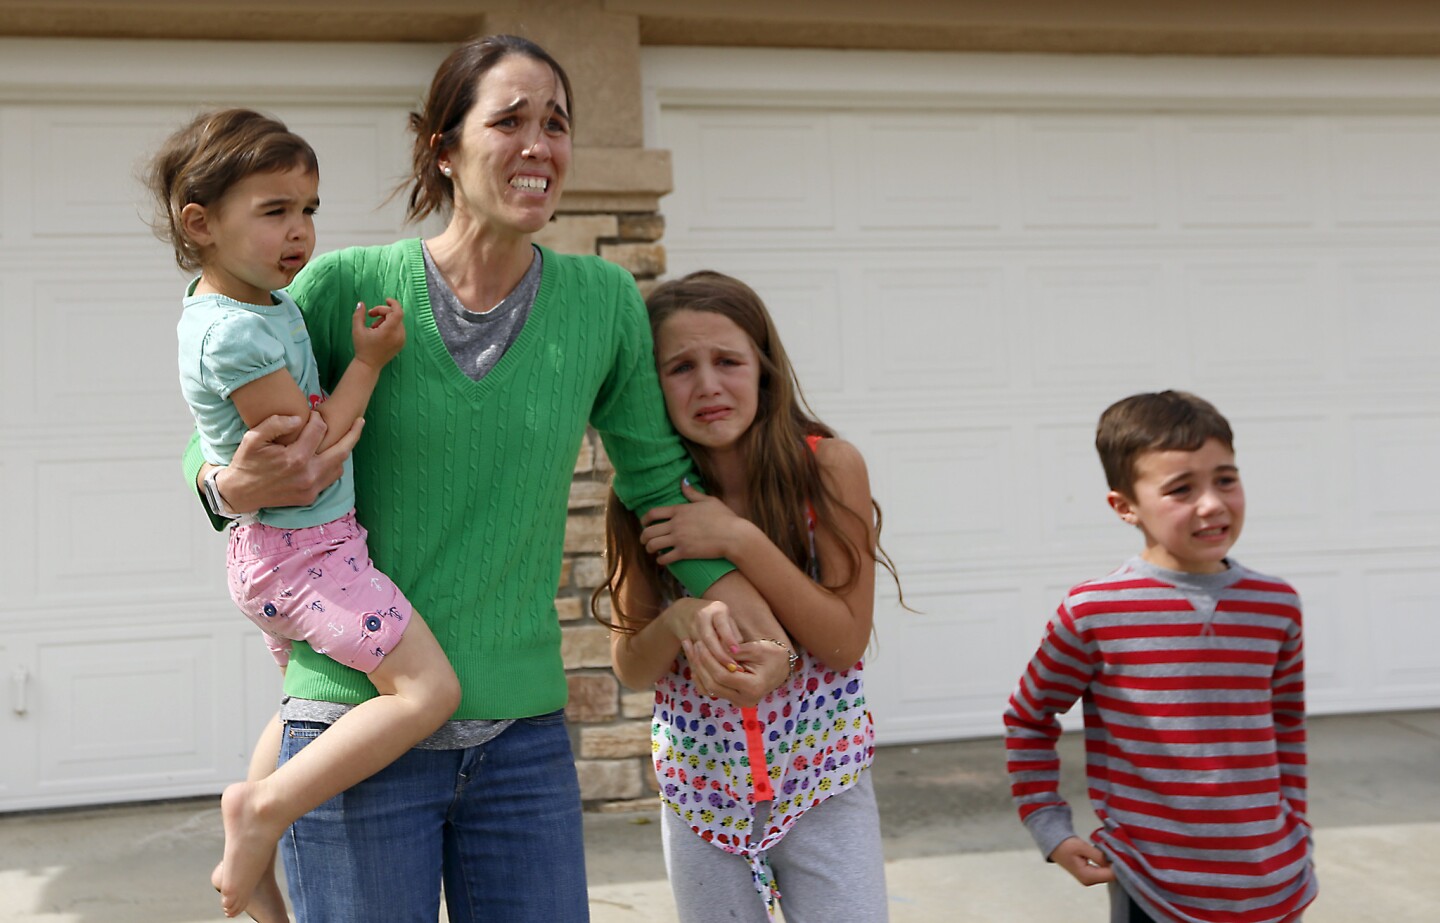 A distraught Summer Page and her children watch as social workers take her 6-year-old foster daughter away.